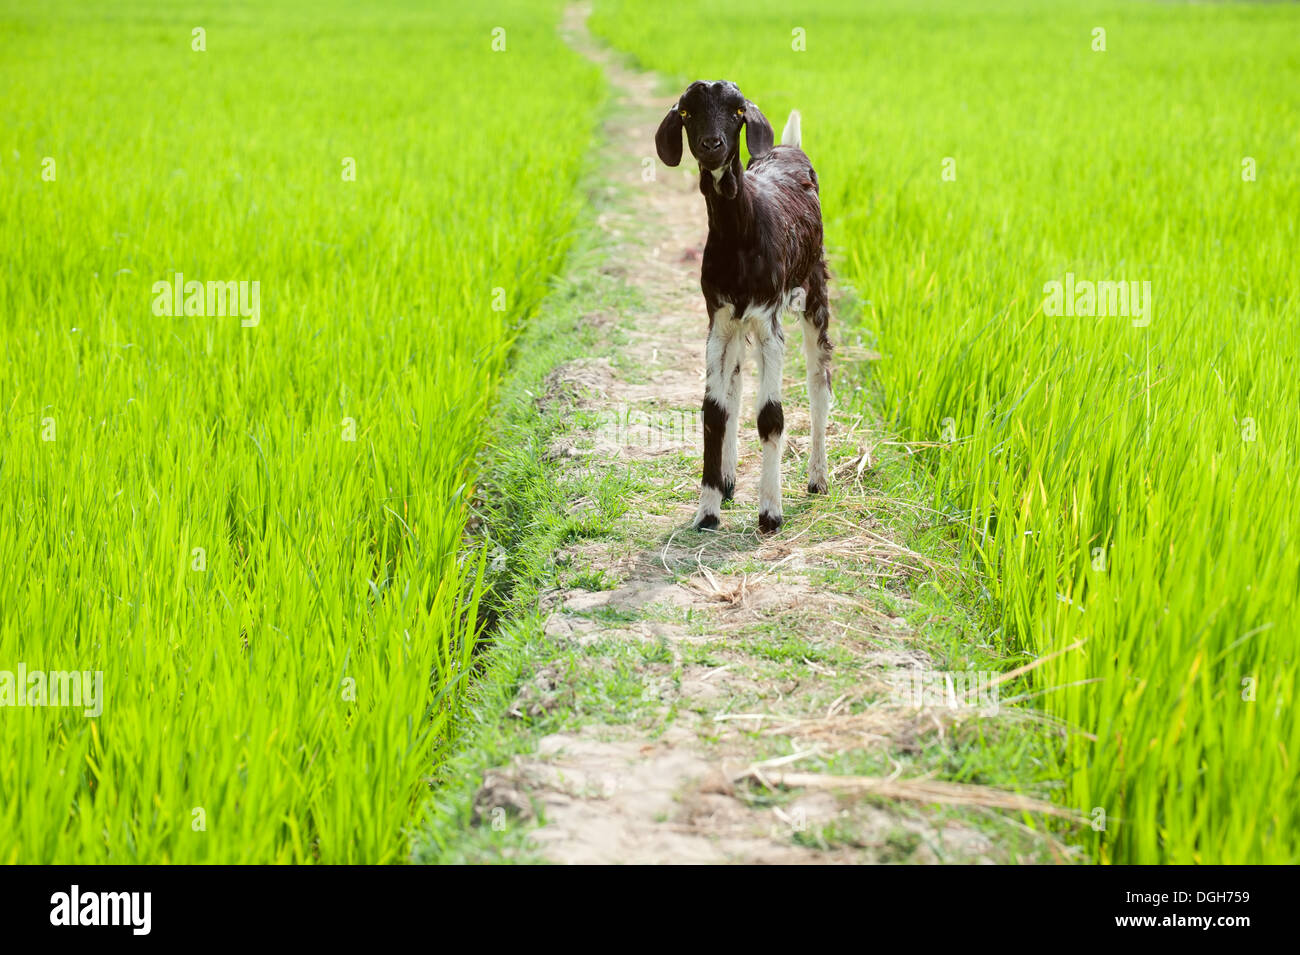 Farm animal. Baby goat playing at rice field. South India, Tamil Nadu Stock Photo